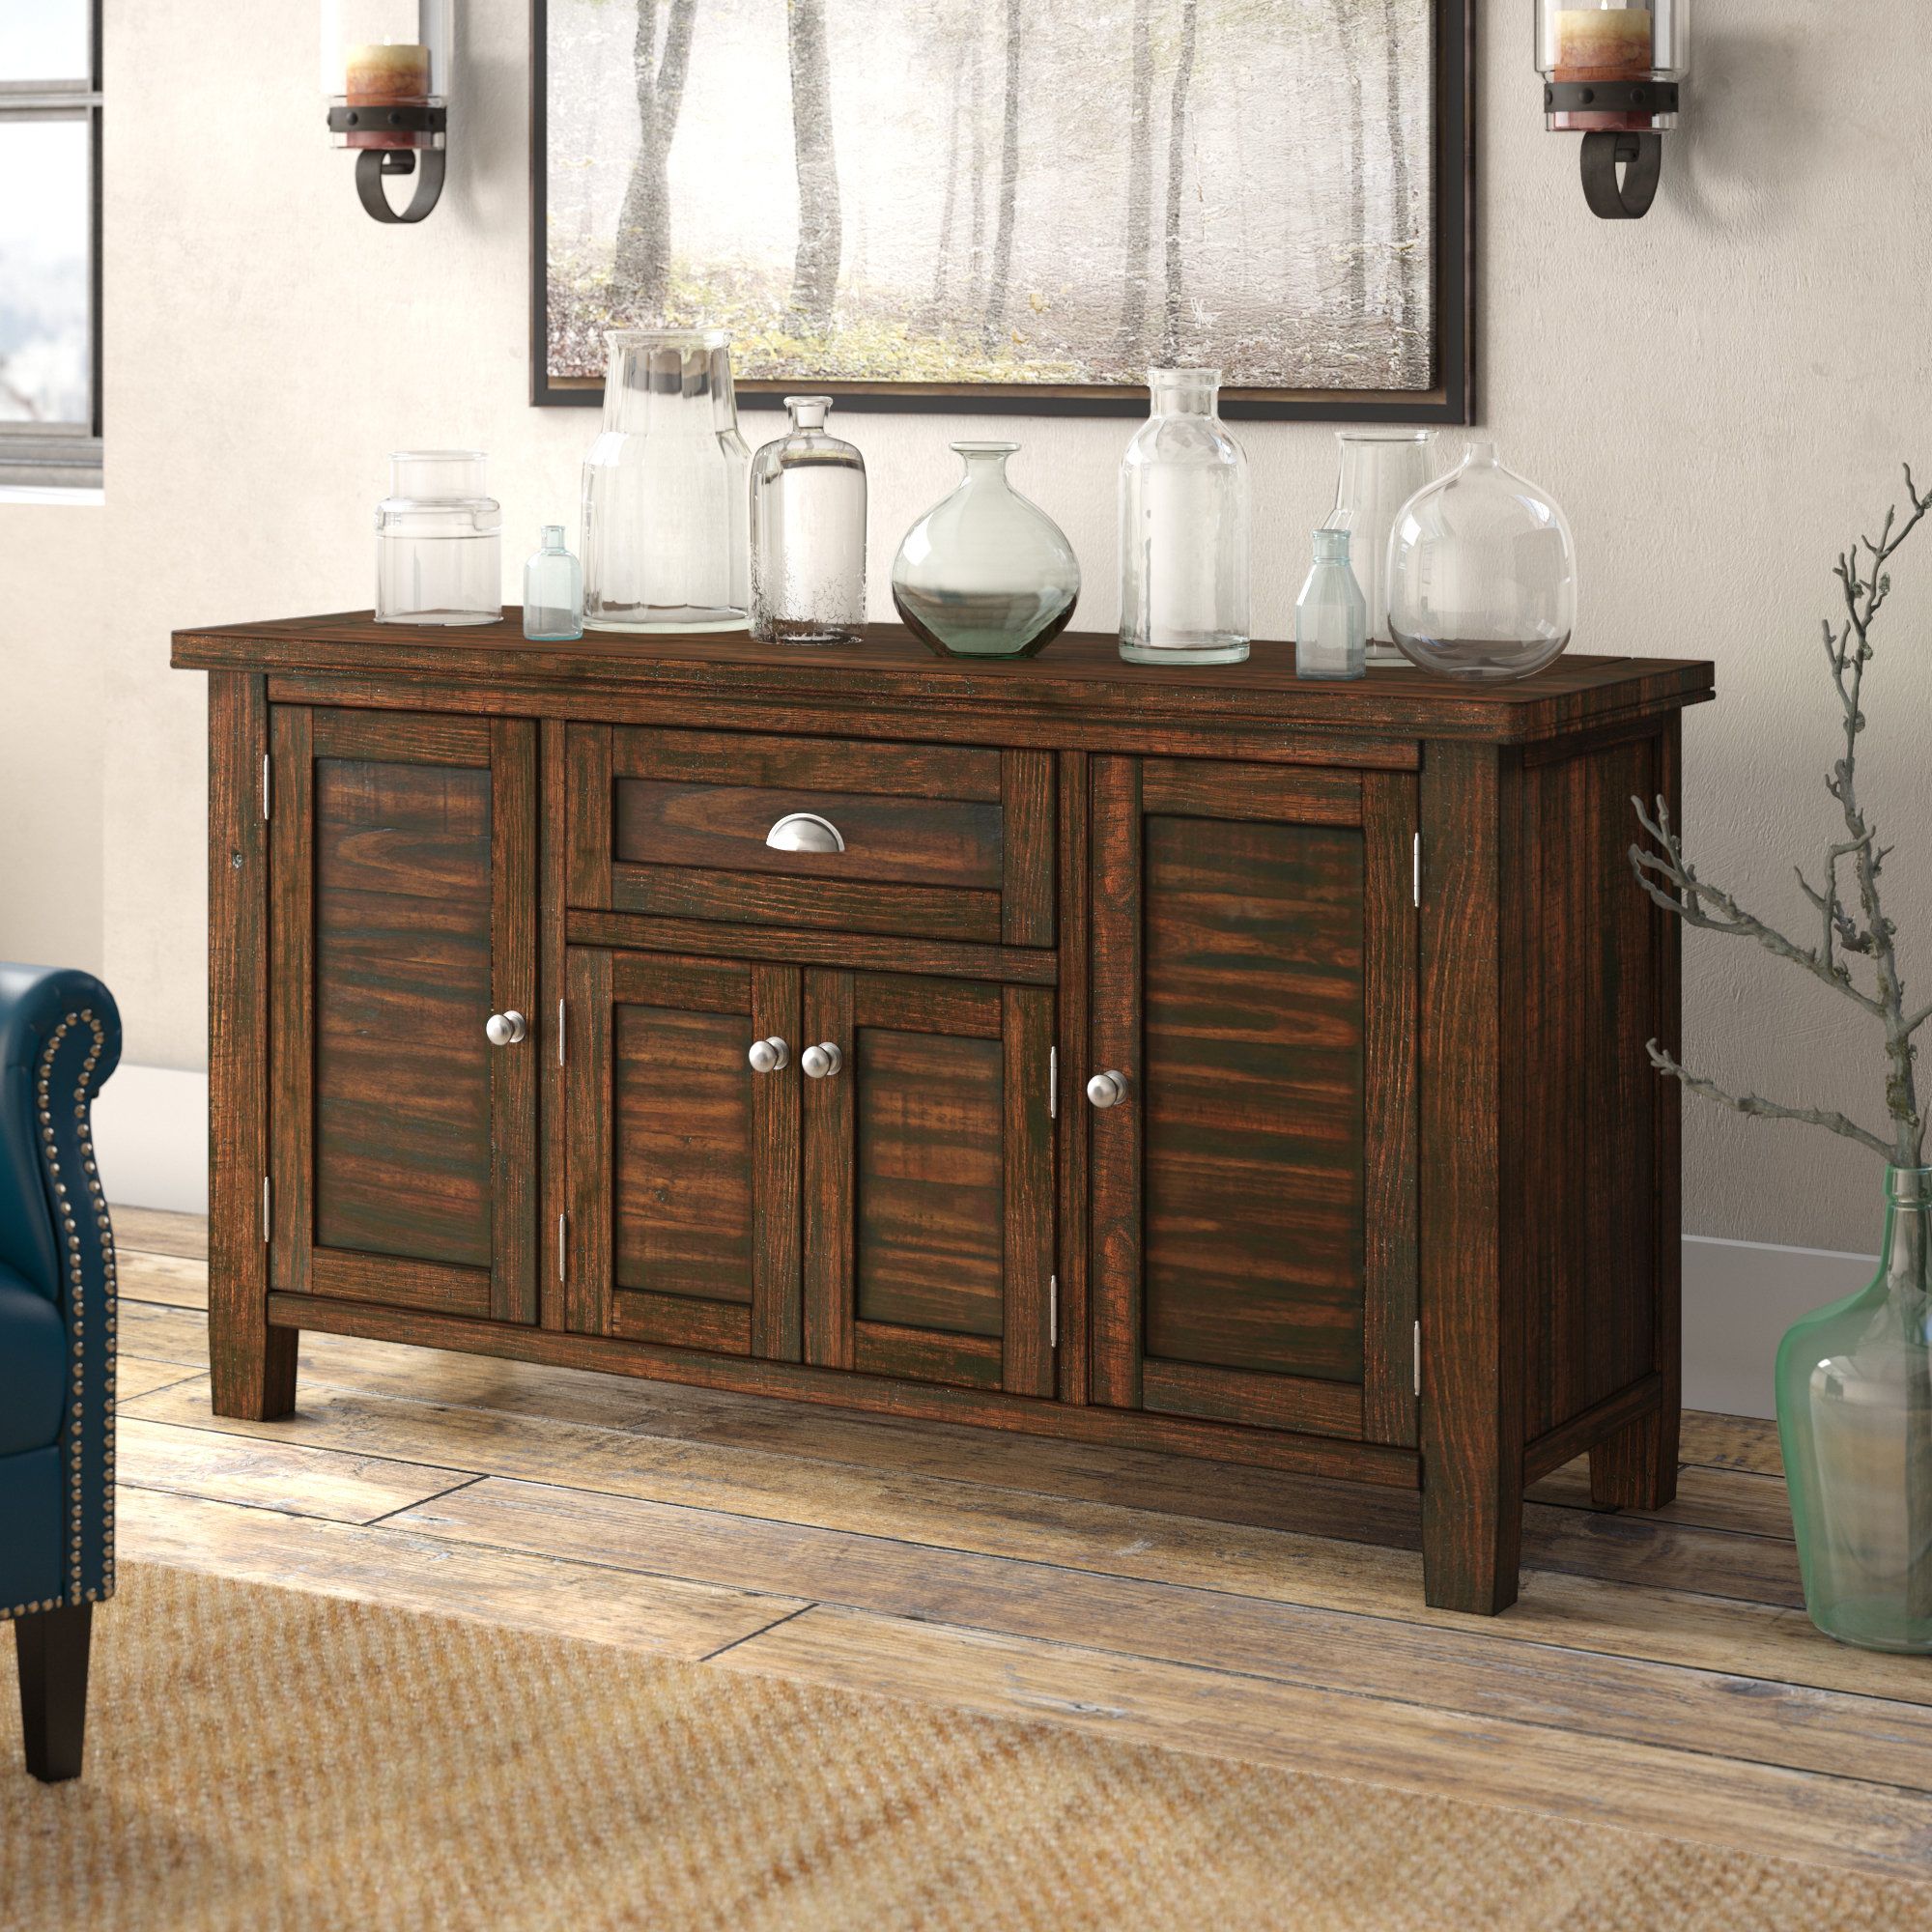 Chaffins Sideboard Intended For Sayles Sideboards (View 3 of 30)